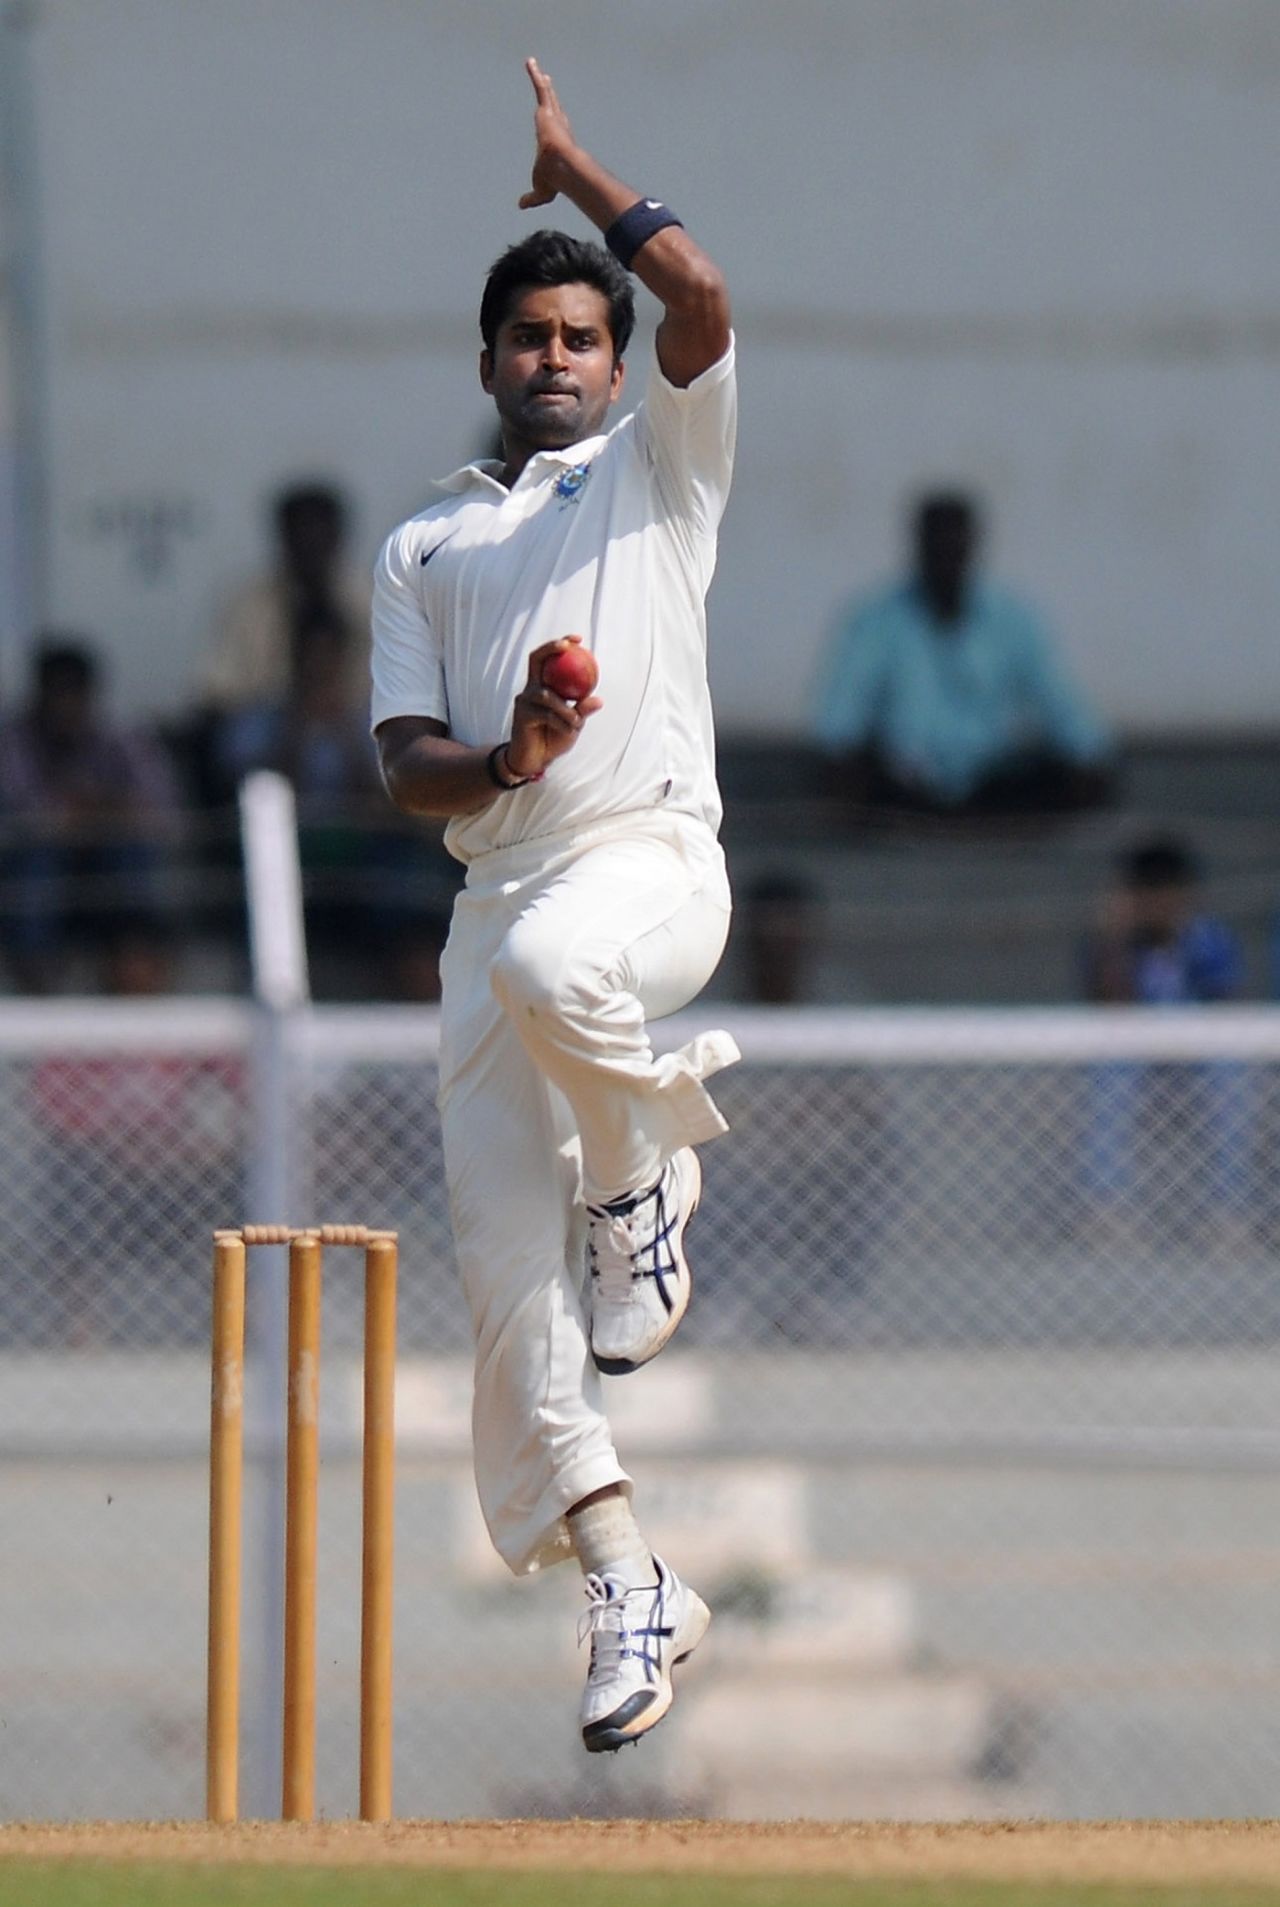 It was his last spell of the season, and Vinay had a lot to fight for